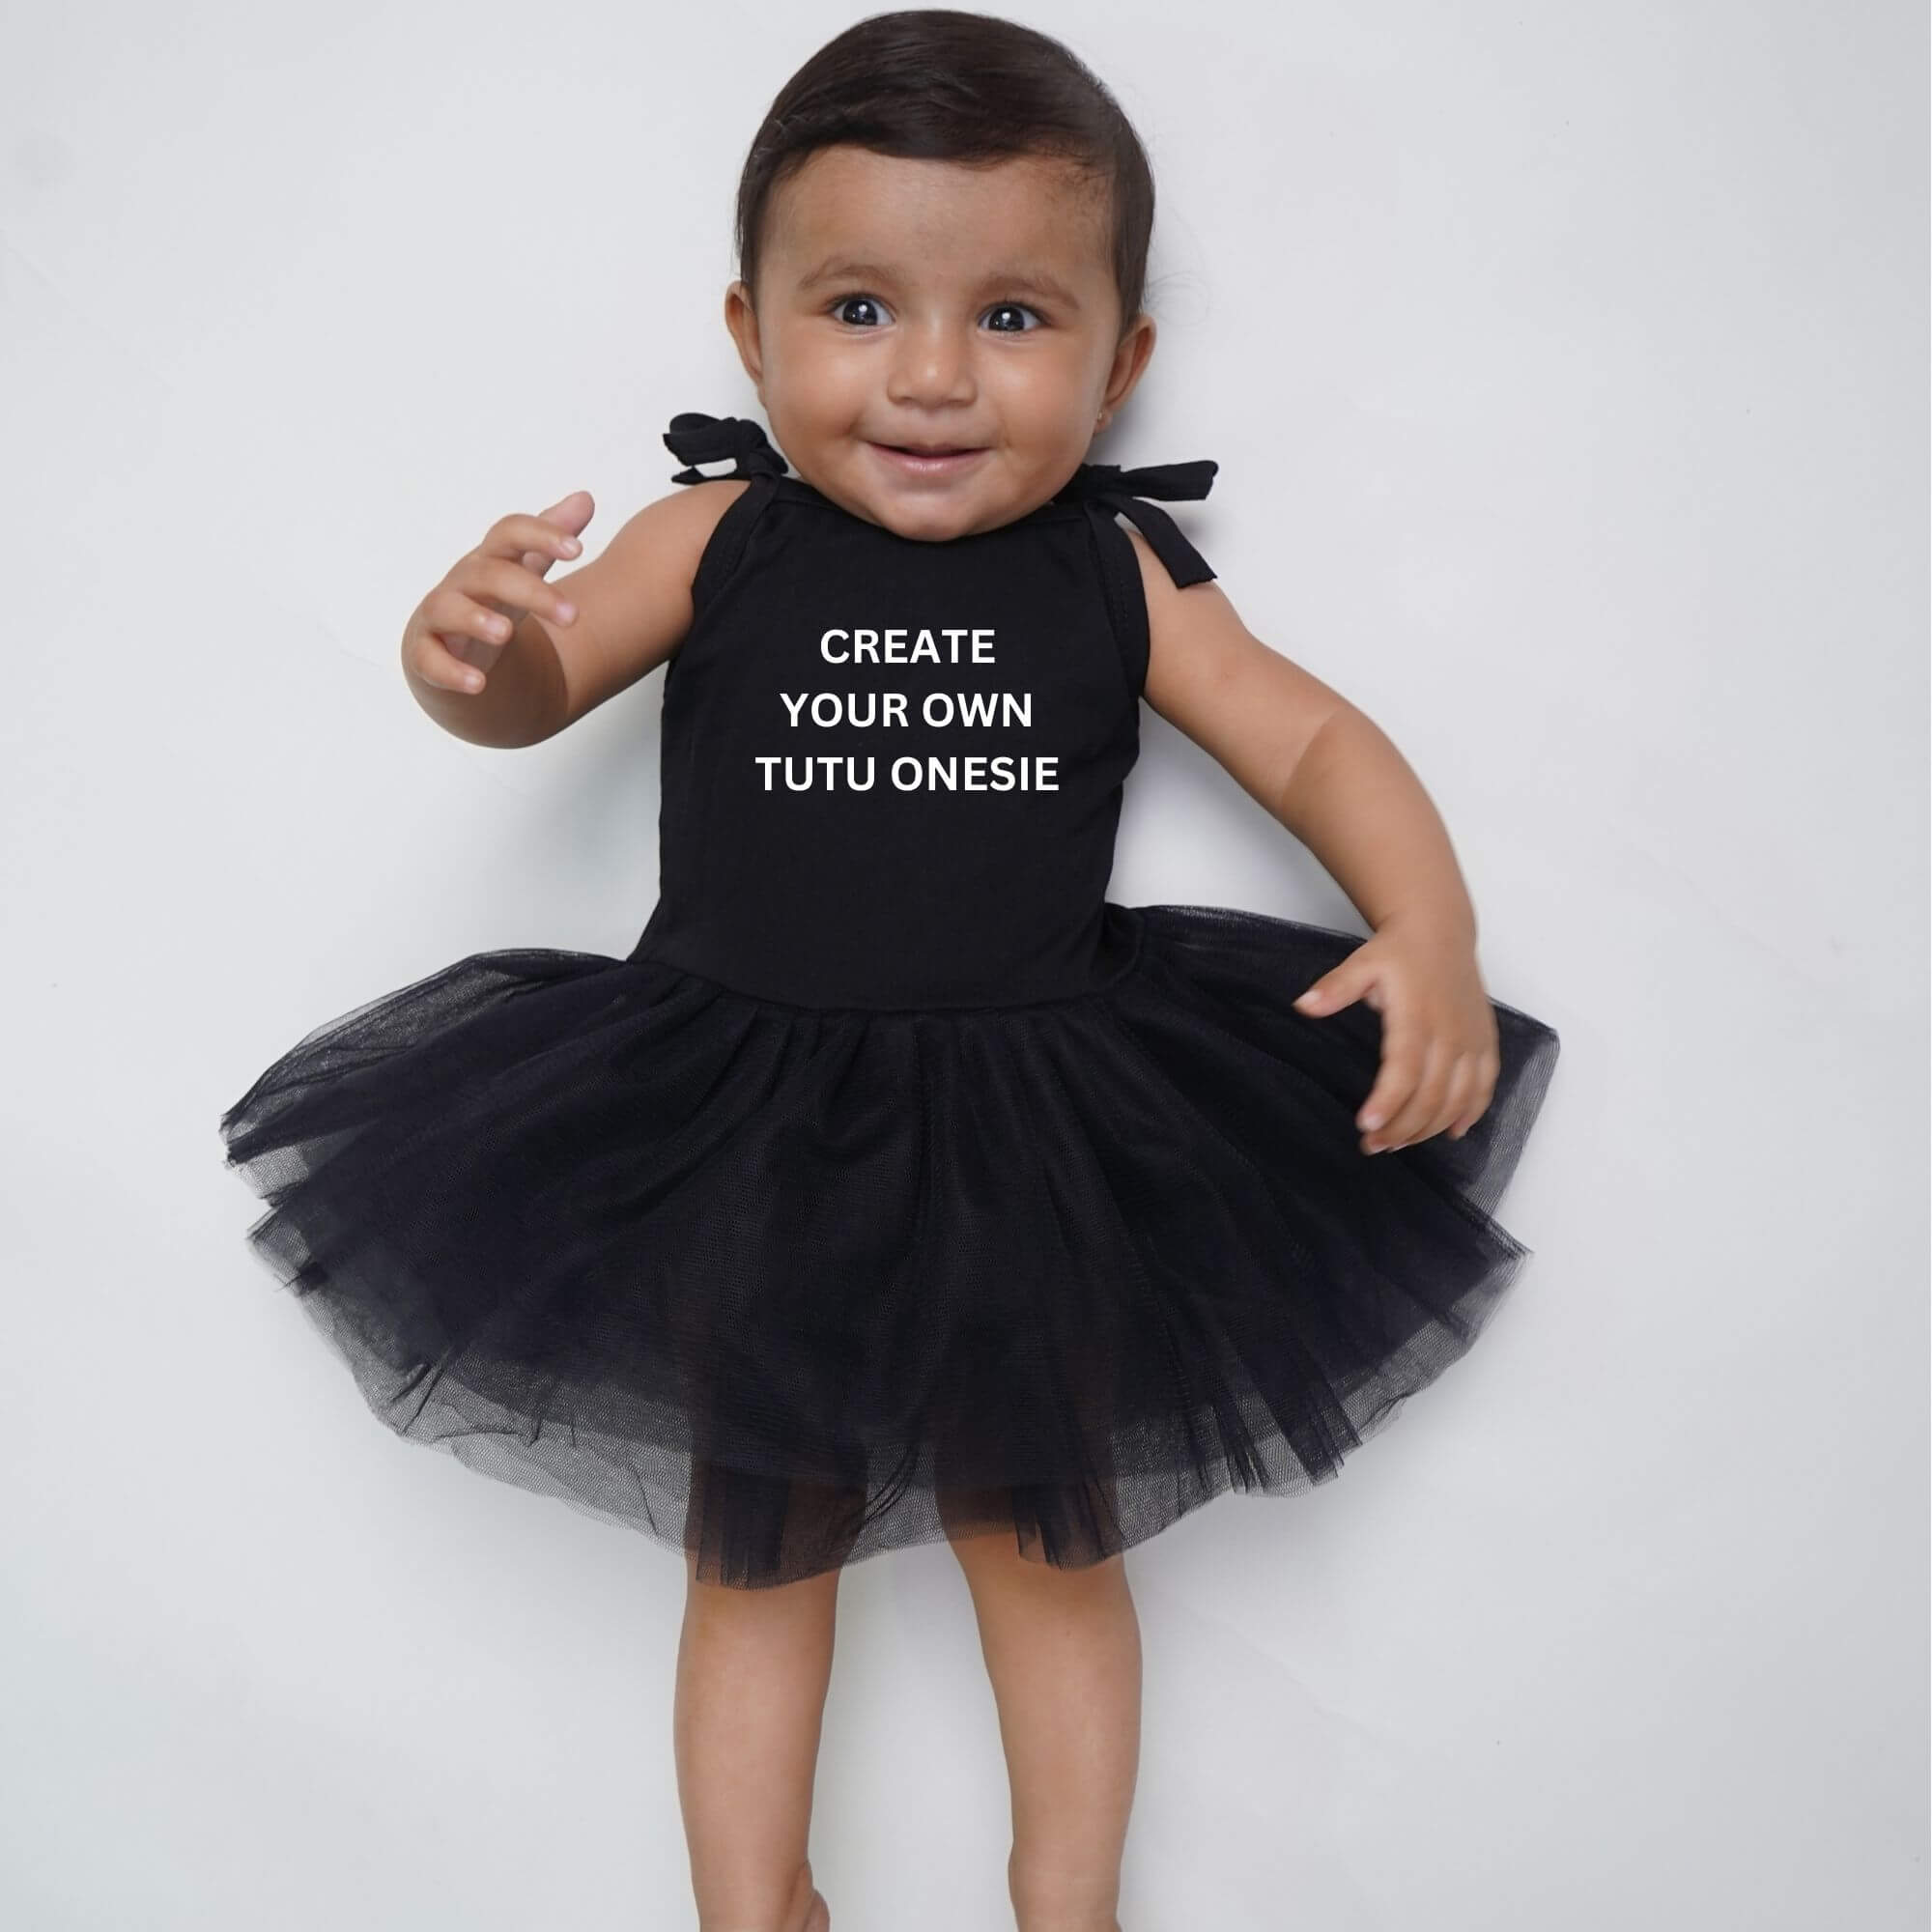 15 Most Expensive Baby Clothes That Are Beyond Adorable | Baby girl dress  patterns, Baby dress set, Kids dress